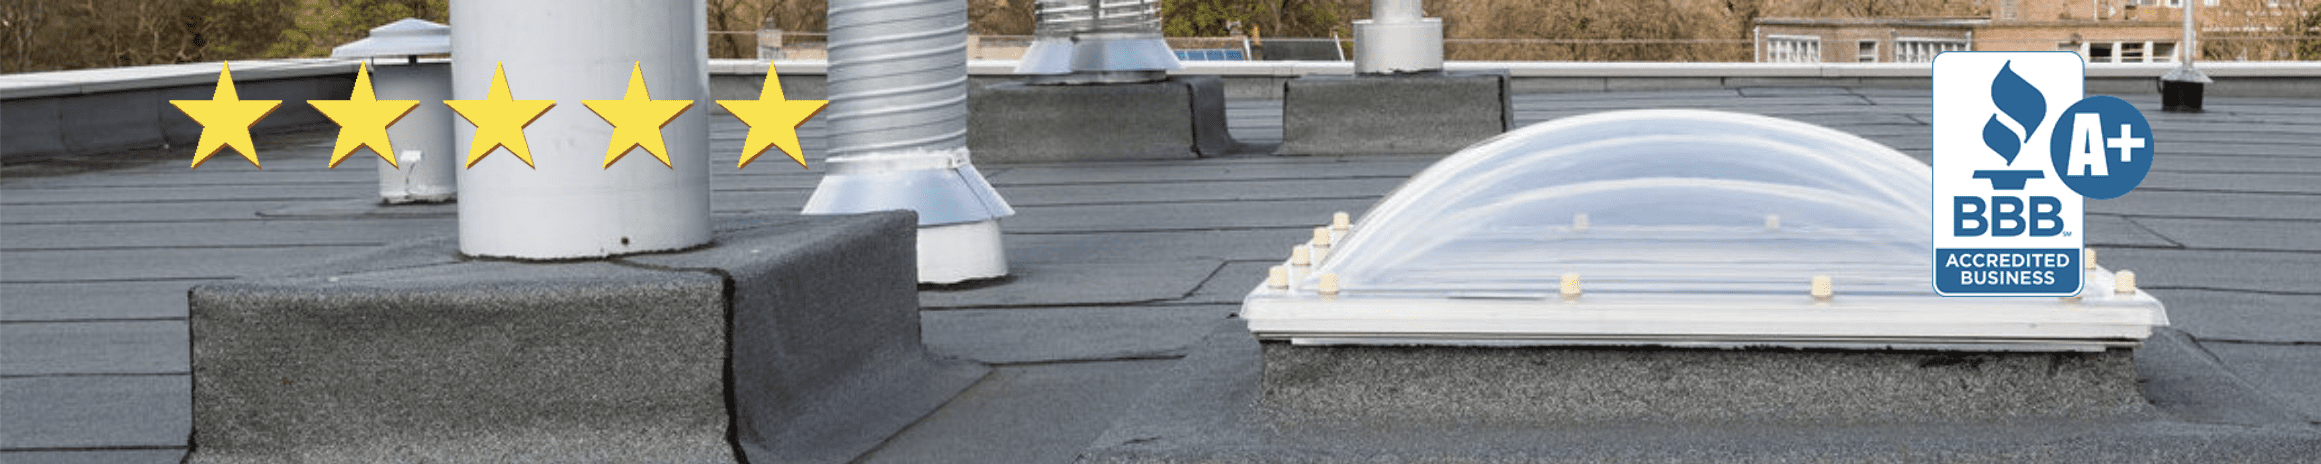 Commercial Insurance  Flat Roof